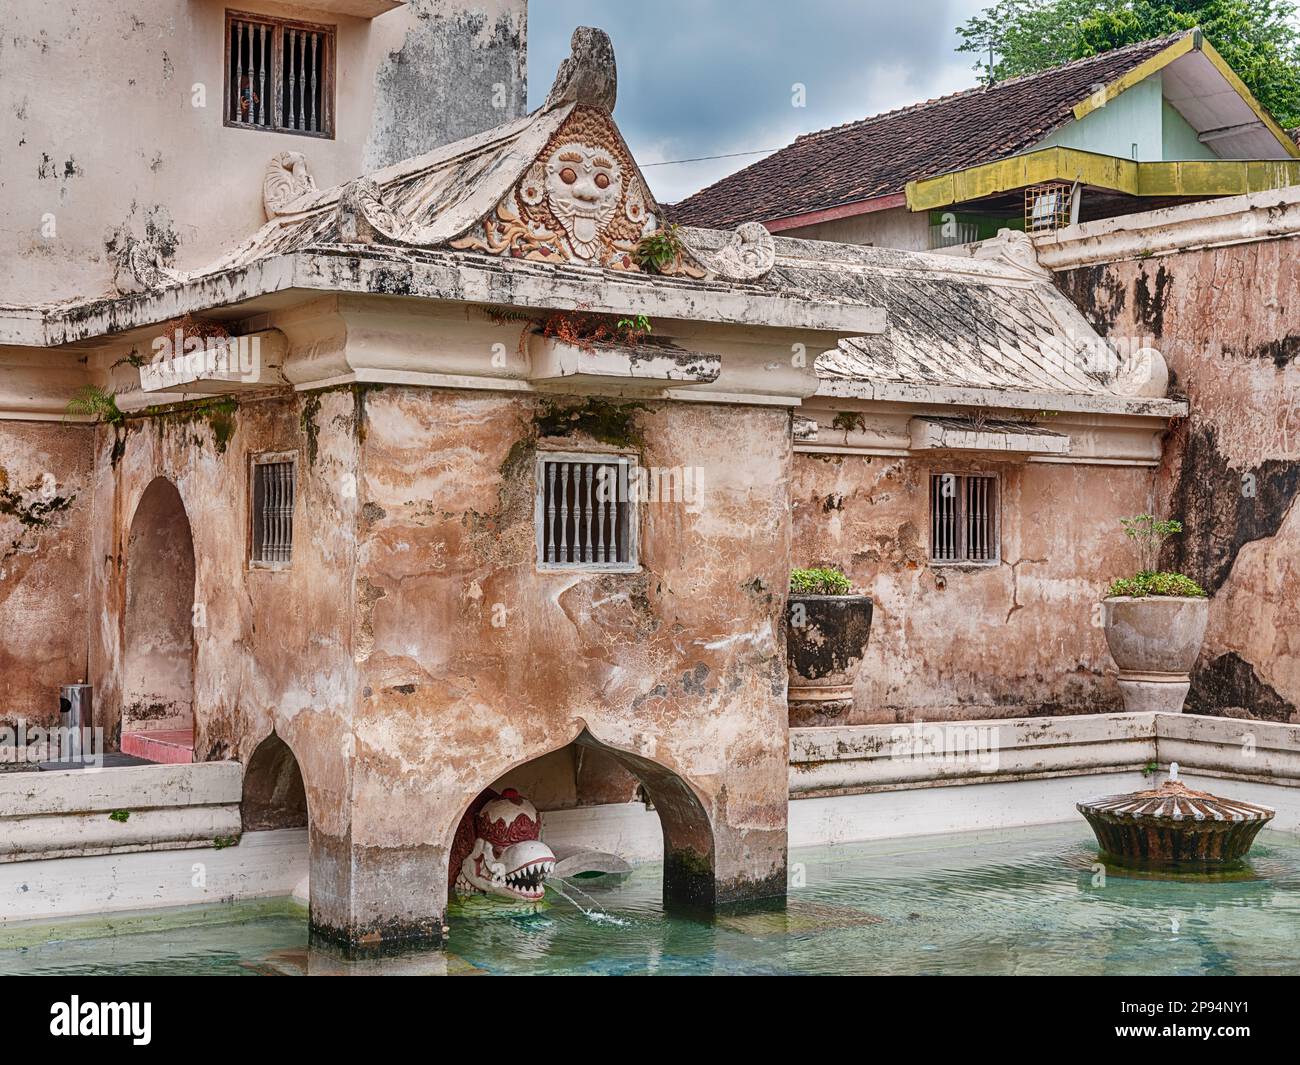 A pool is located in a courtyard at the Taman Sari complex in Yogyakarta, Indonesia. Stock Photo